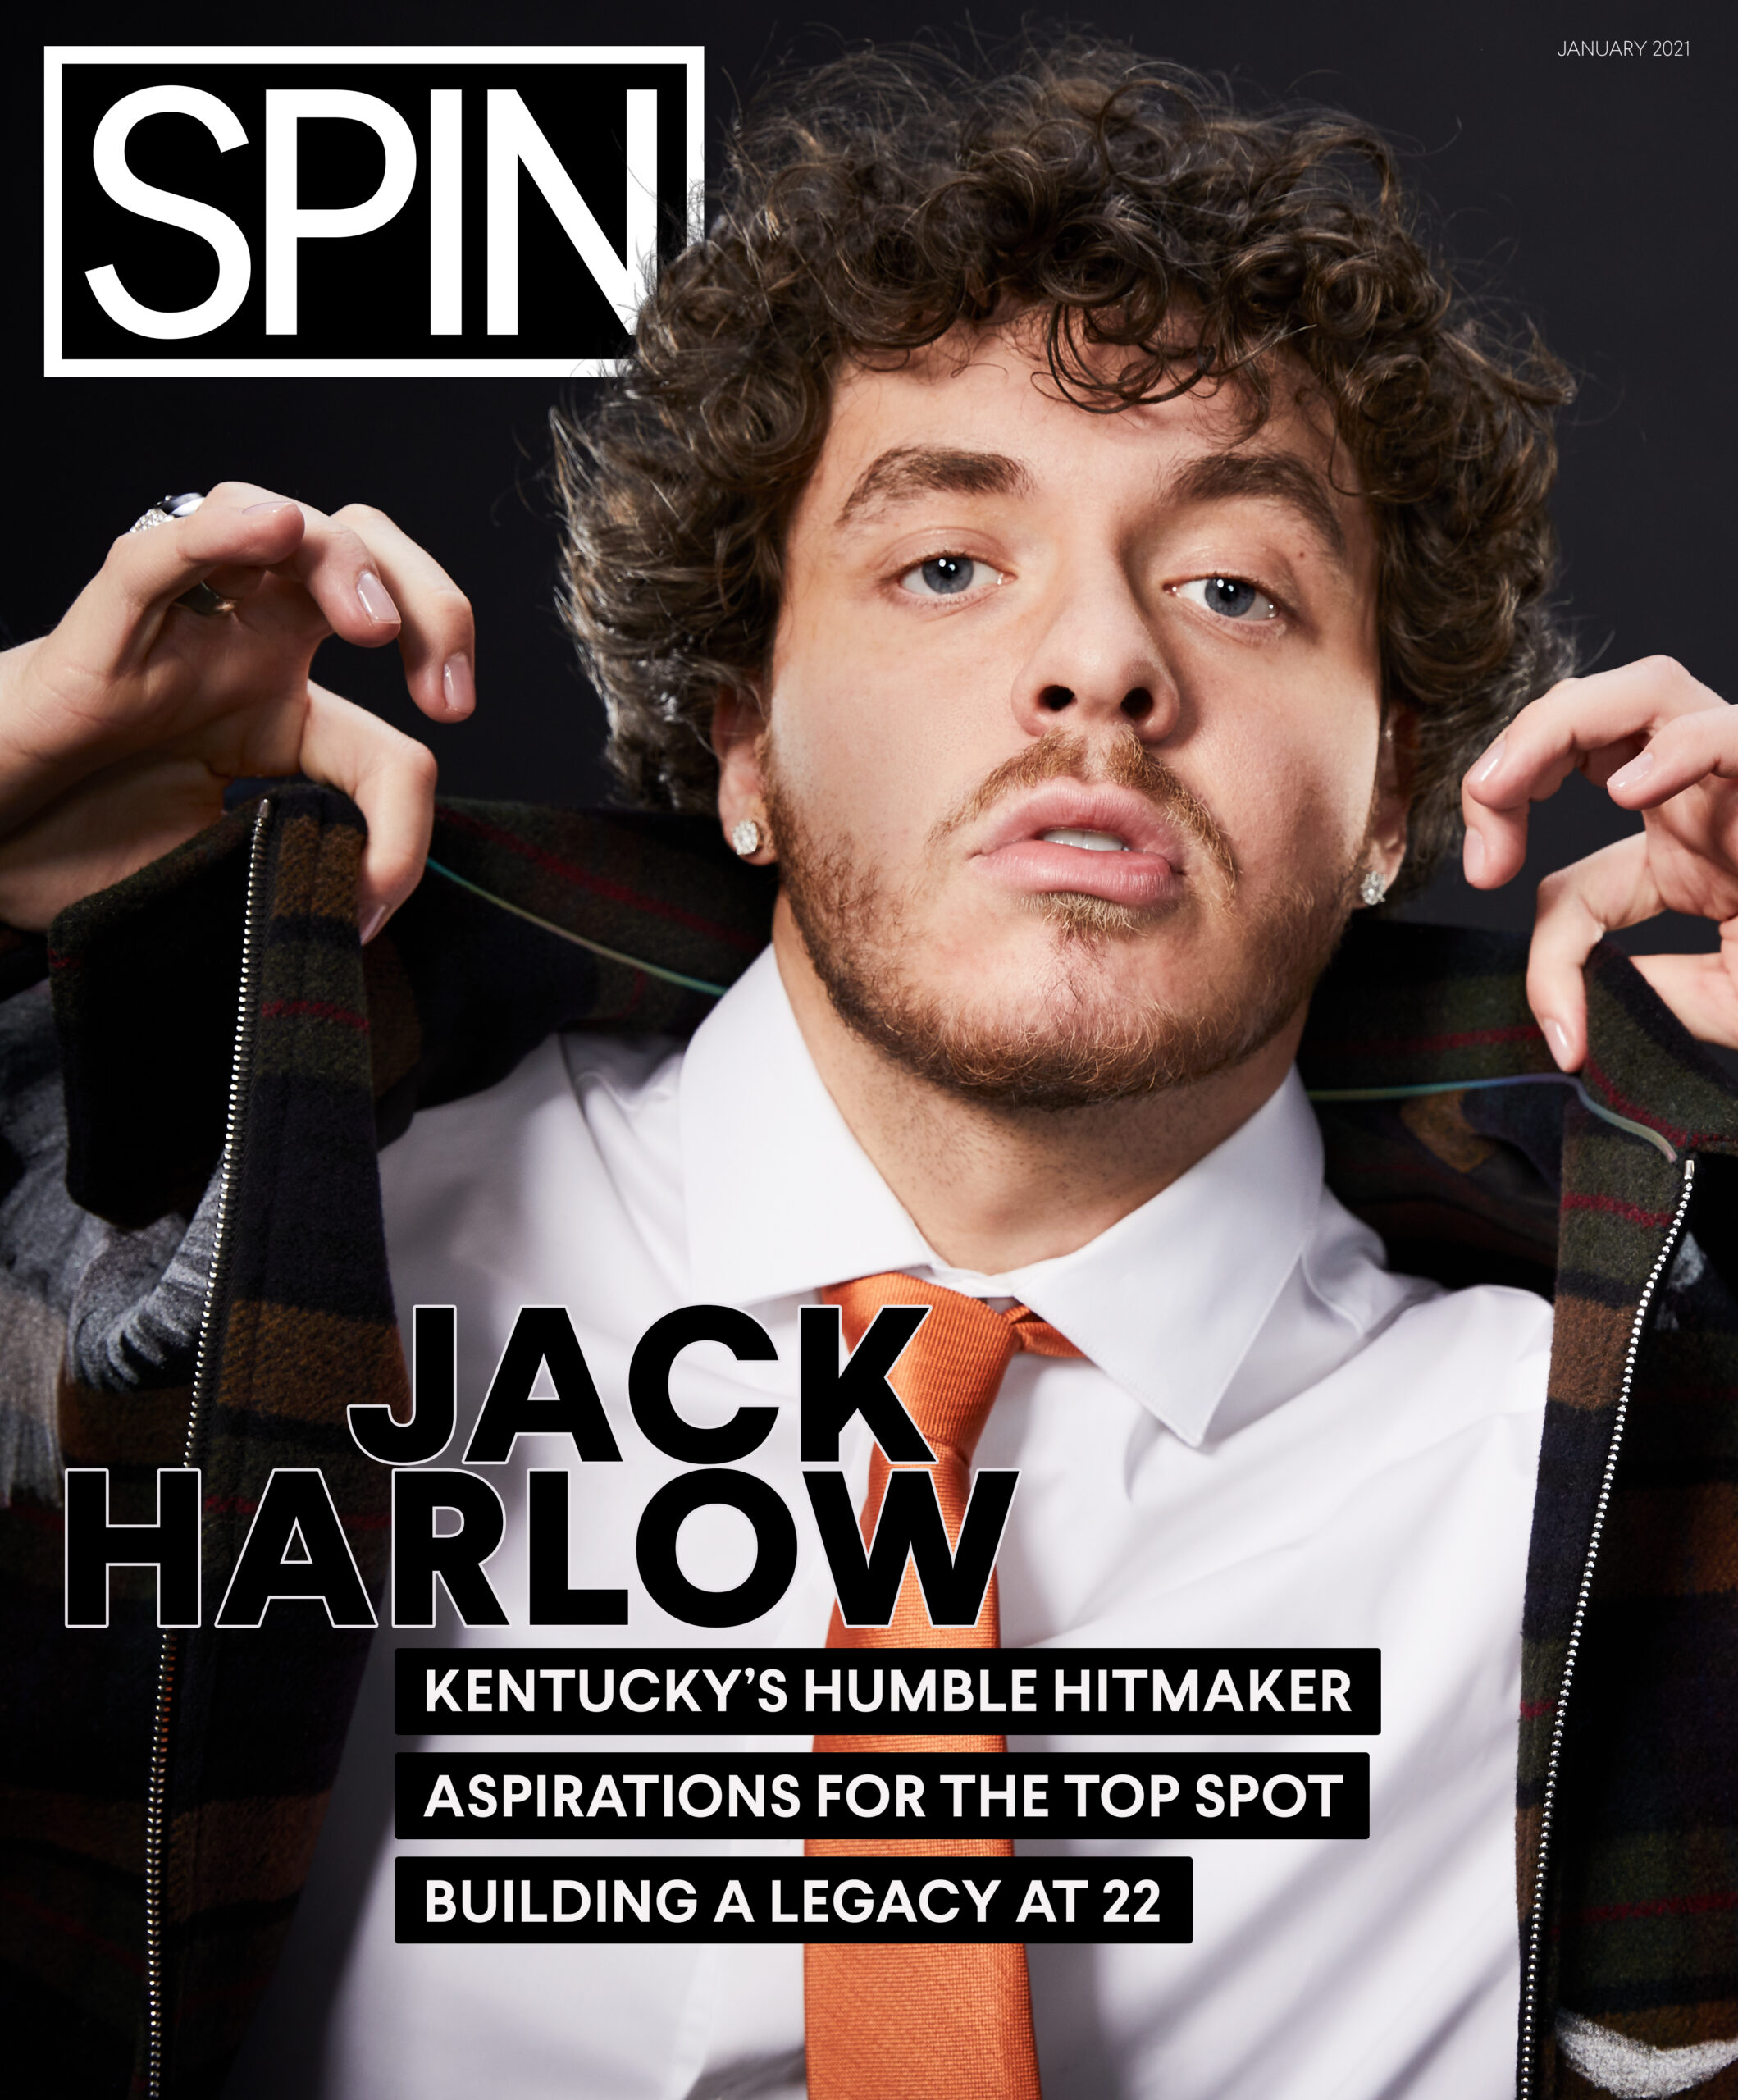 SPIN-Cover-Jack_Harlow-Jan_2021-FINAL2-scaled.jpg